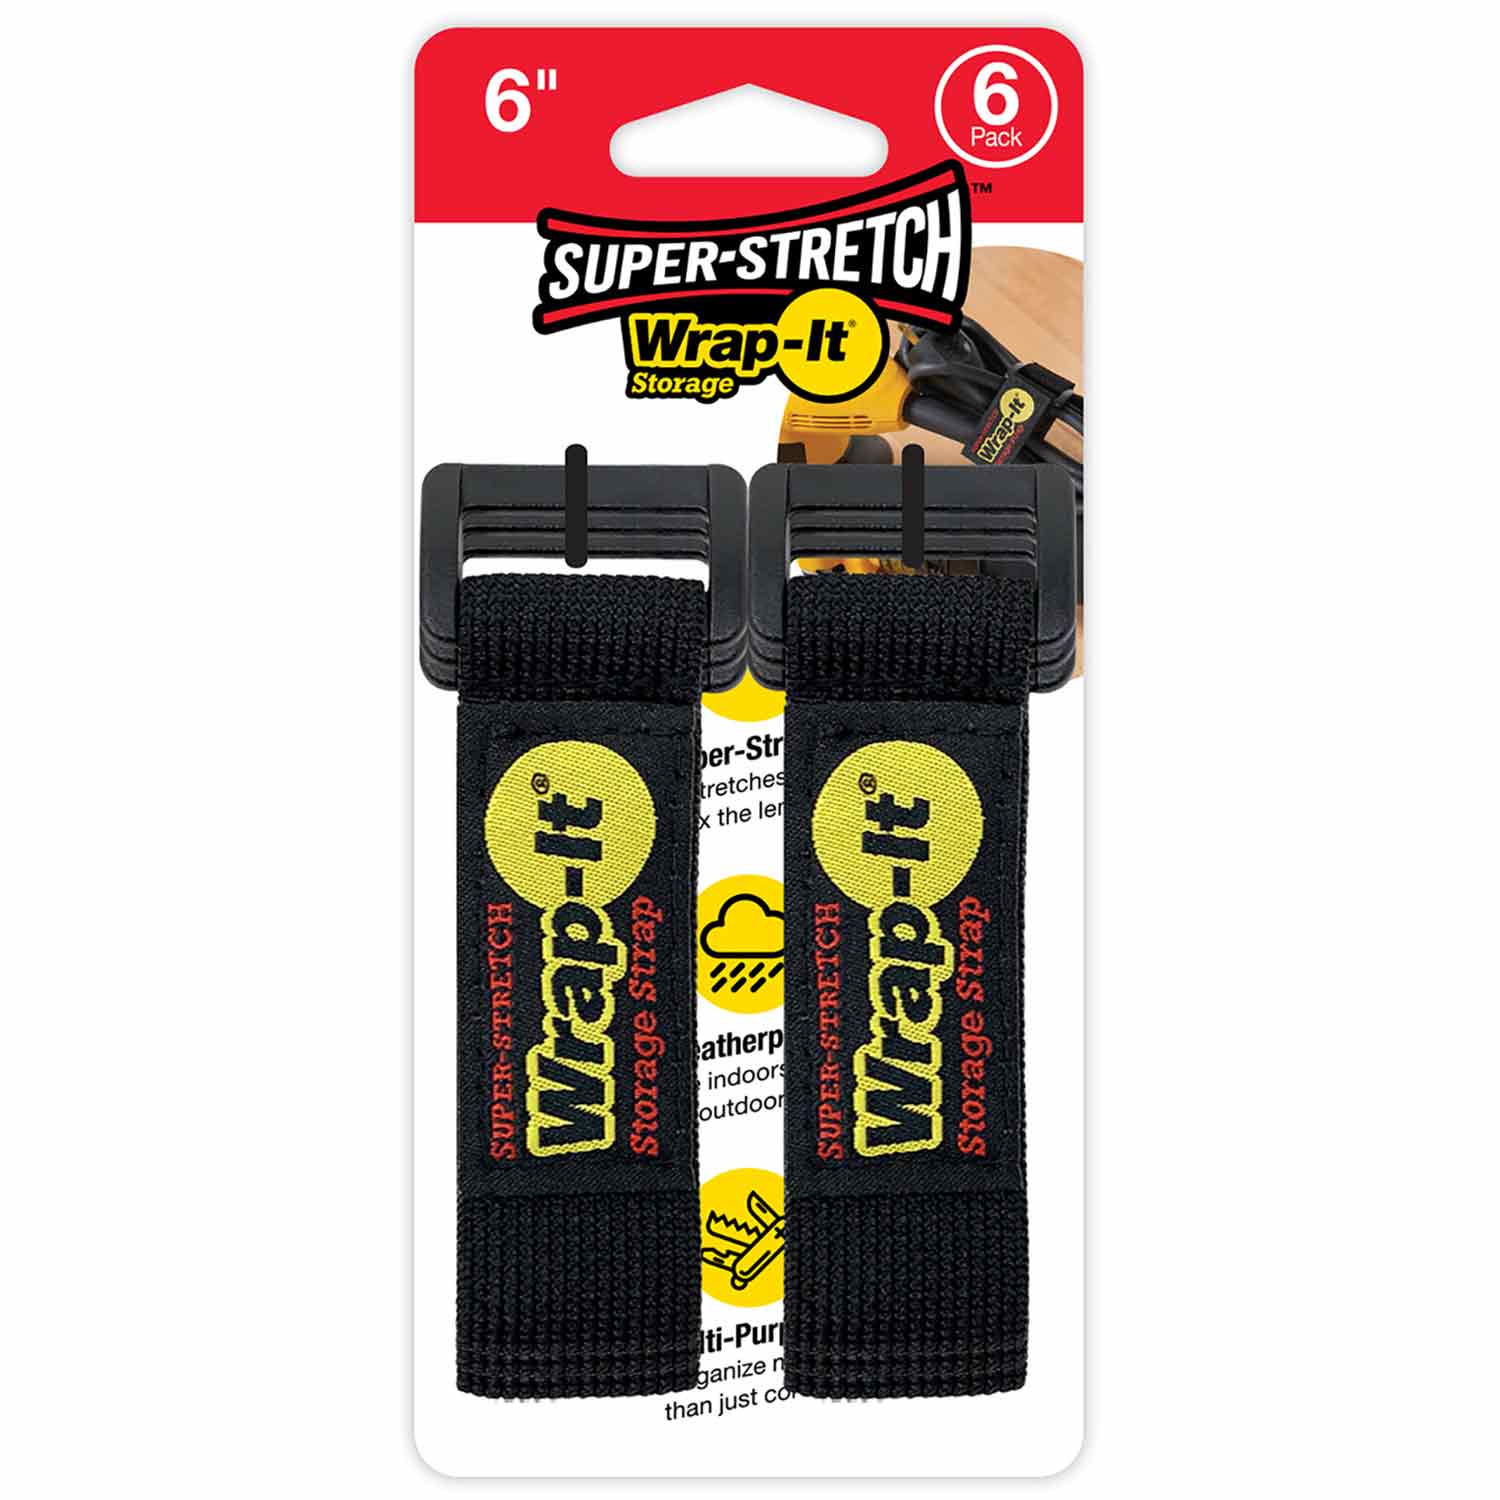 Extension Cord Wrap Organizer, 12 Pack of Elastic Storage Straps - 6 Inch  Stretchy Hook and Loop Cinch Straps for Power Cables, Hoses, Ropes, and More